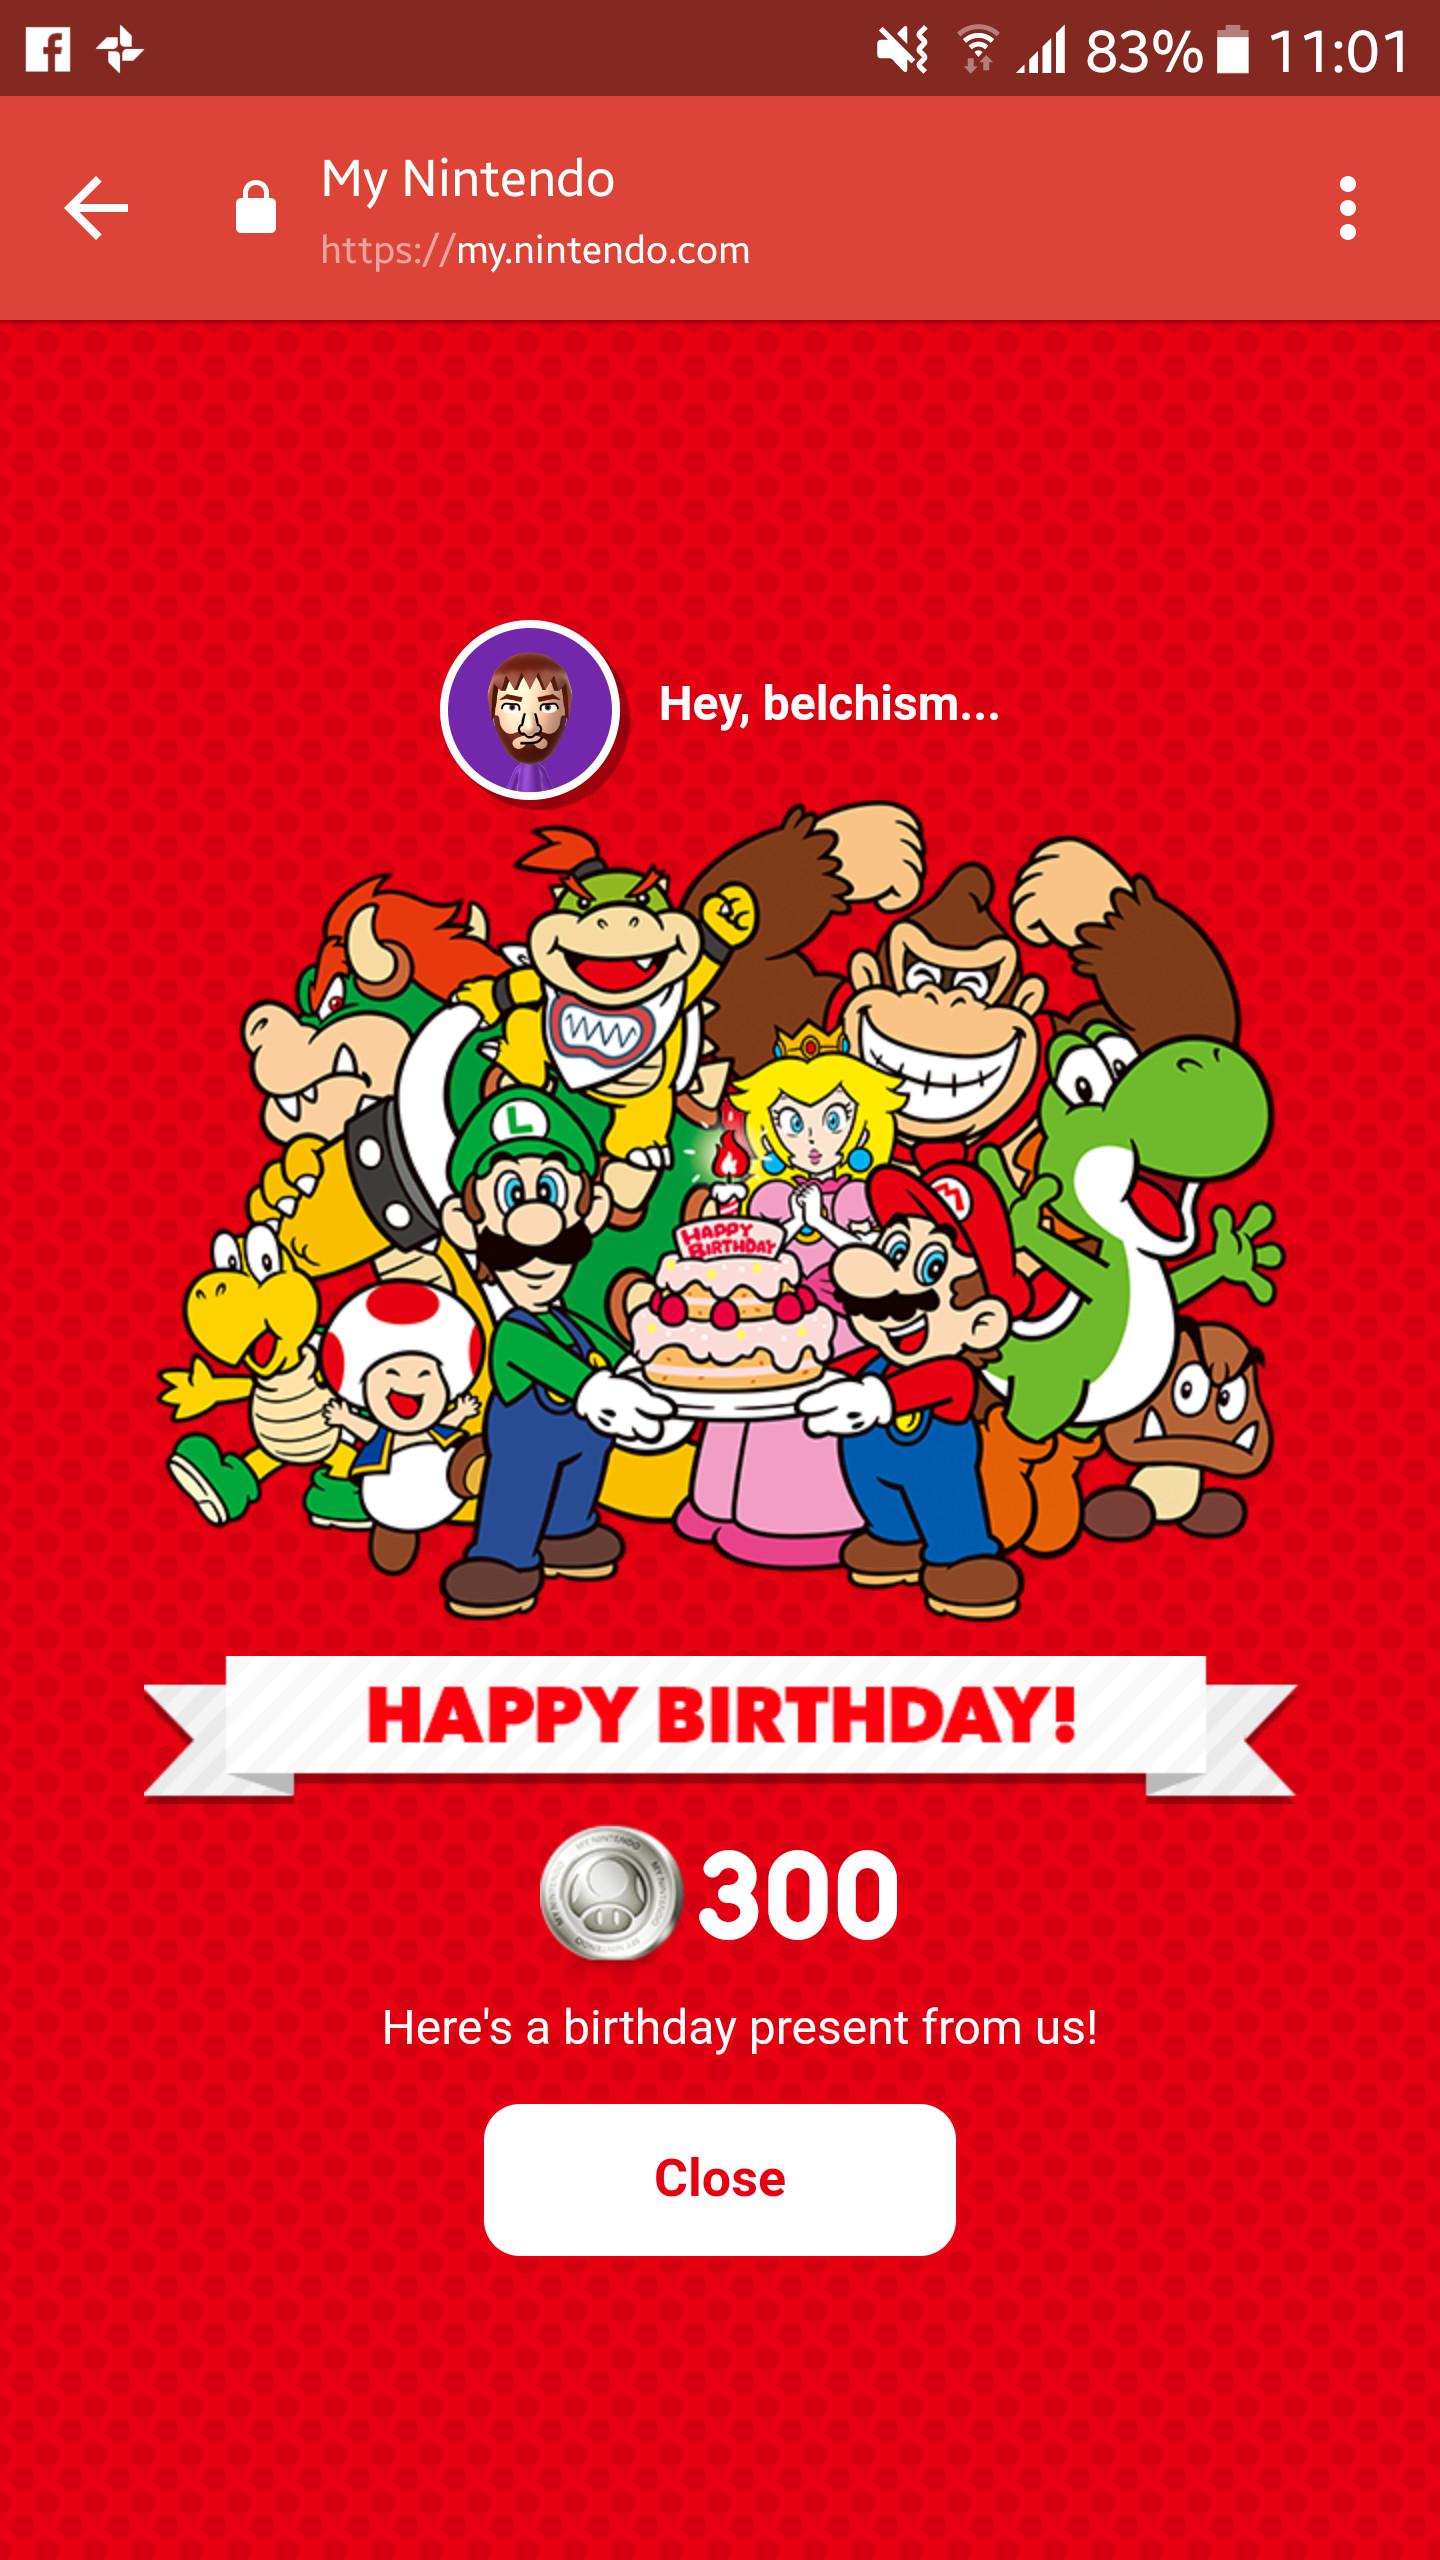 Today - Nintendo Happy Birthday Email , HD Wallpaper & Backgrounds